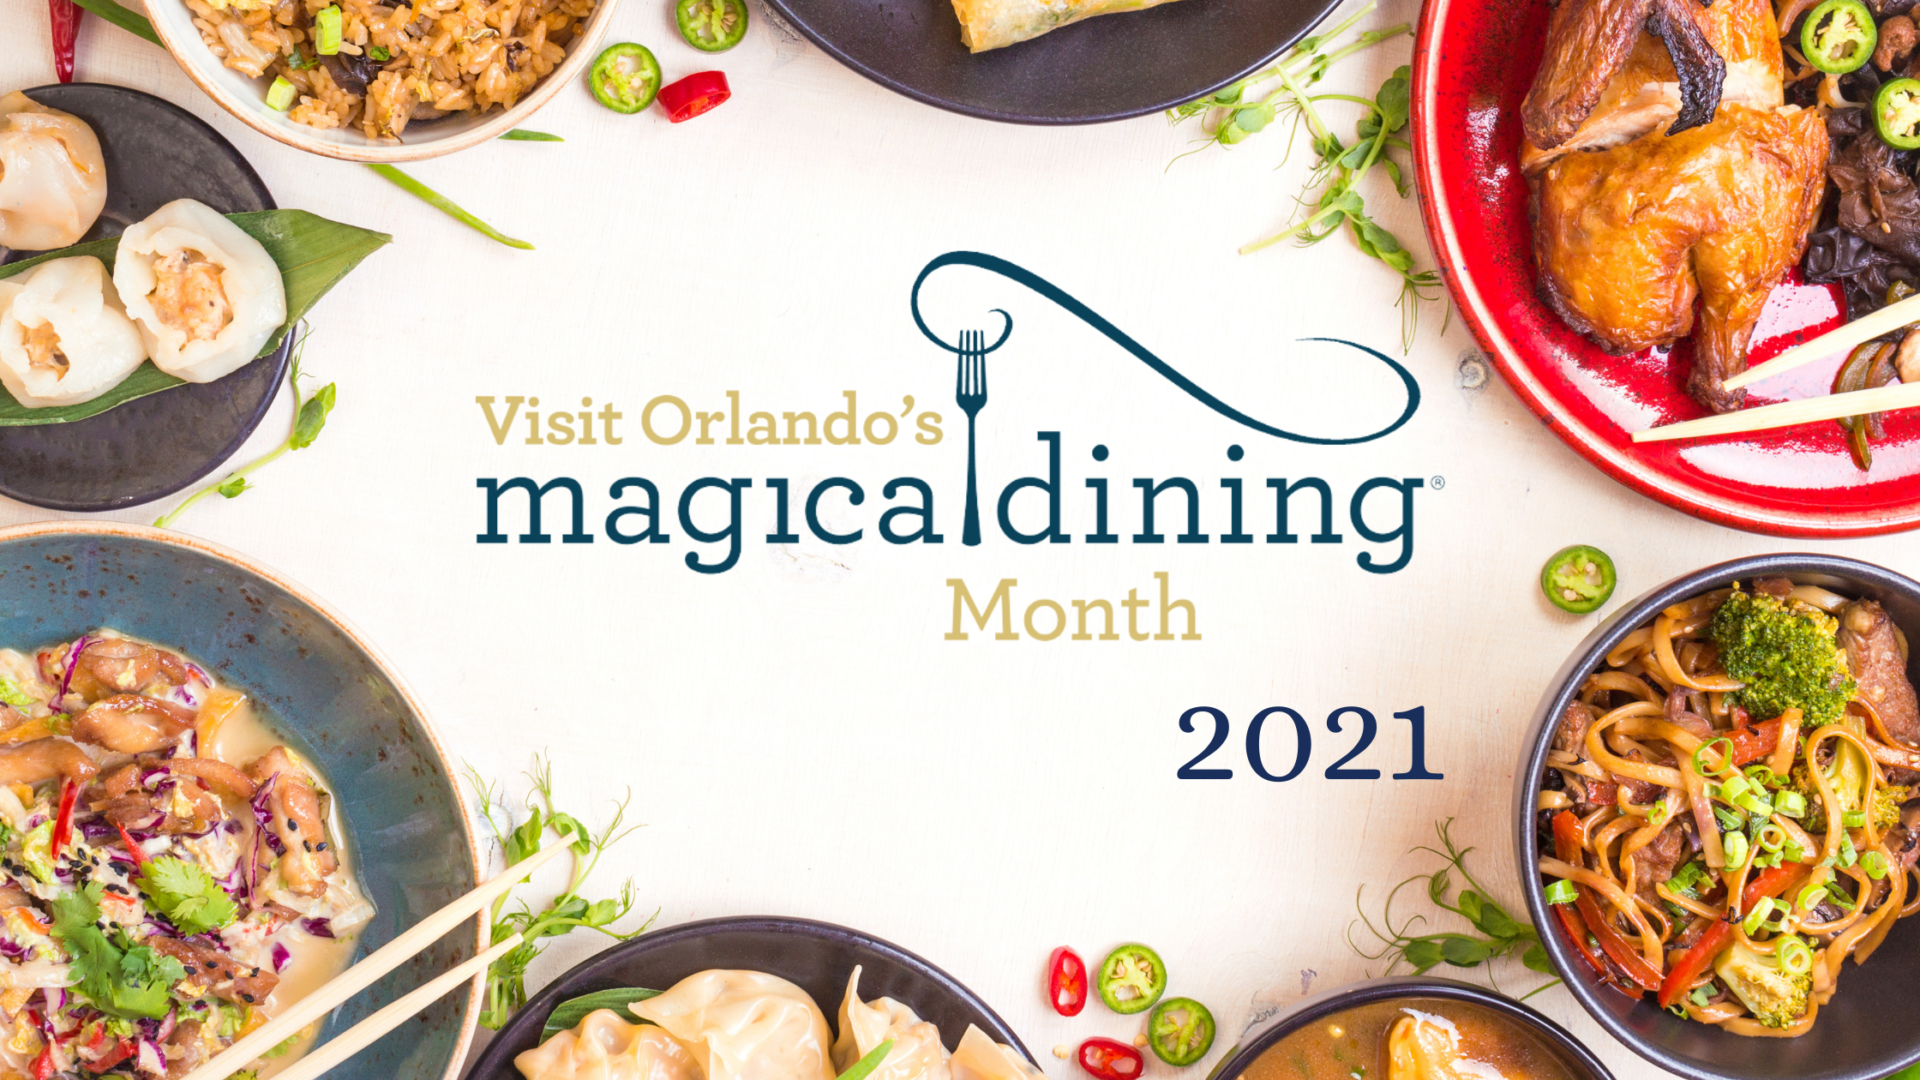 magical dining month 2021 orlando